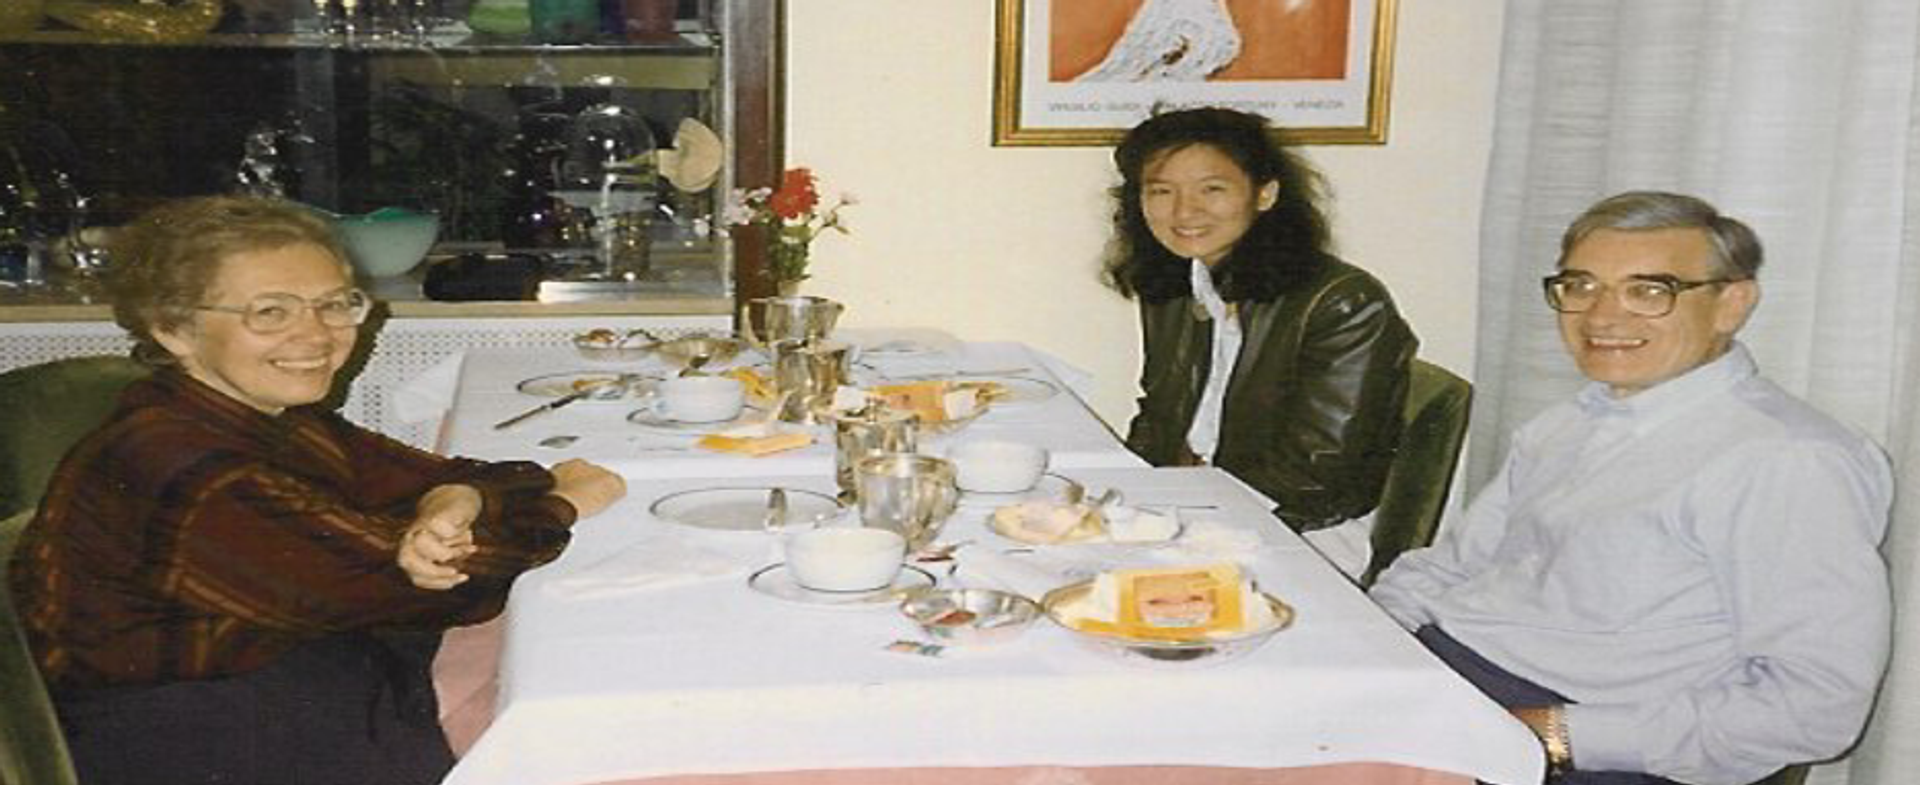 My first day as a human geneticist, in May 1993. I took this picture of Ming Hui with Janellen and Peter Huttenlocher while we ate lunch on Murano in Venice. That day the four of us planned our genetic collaboration to study PVNH.